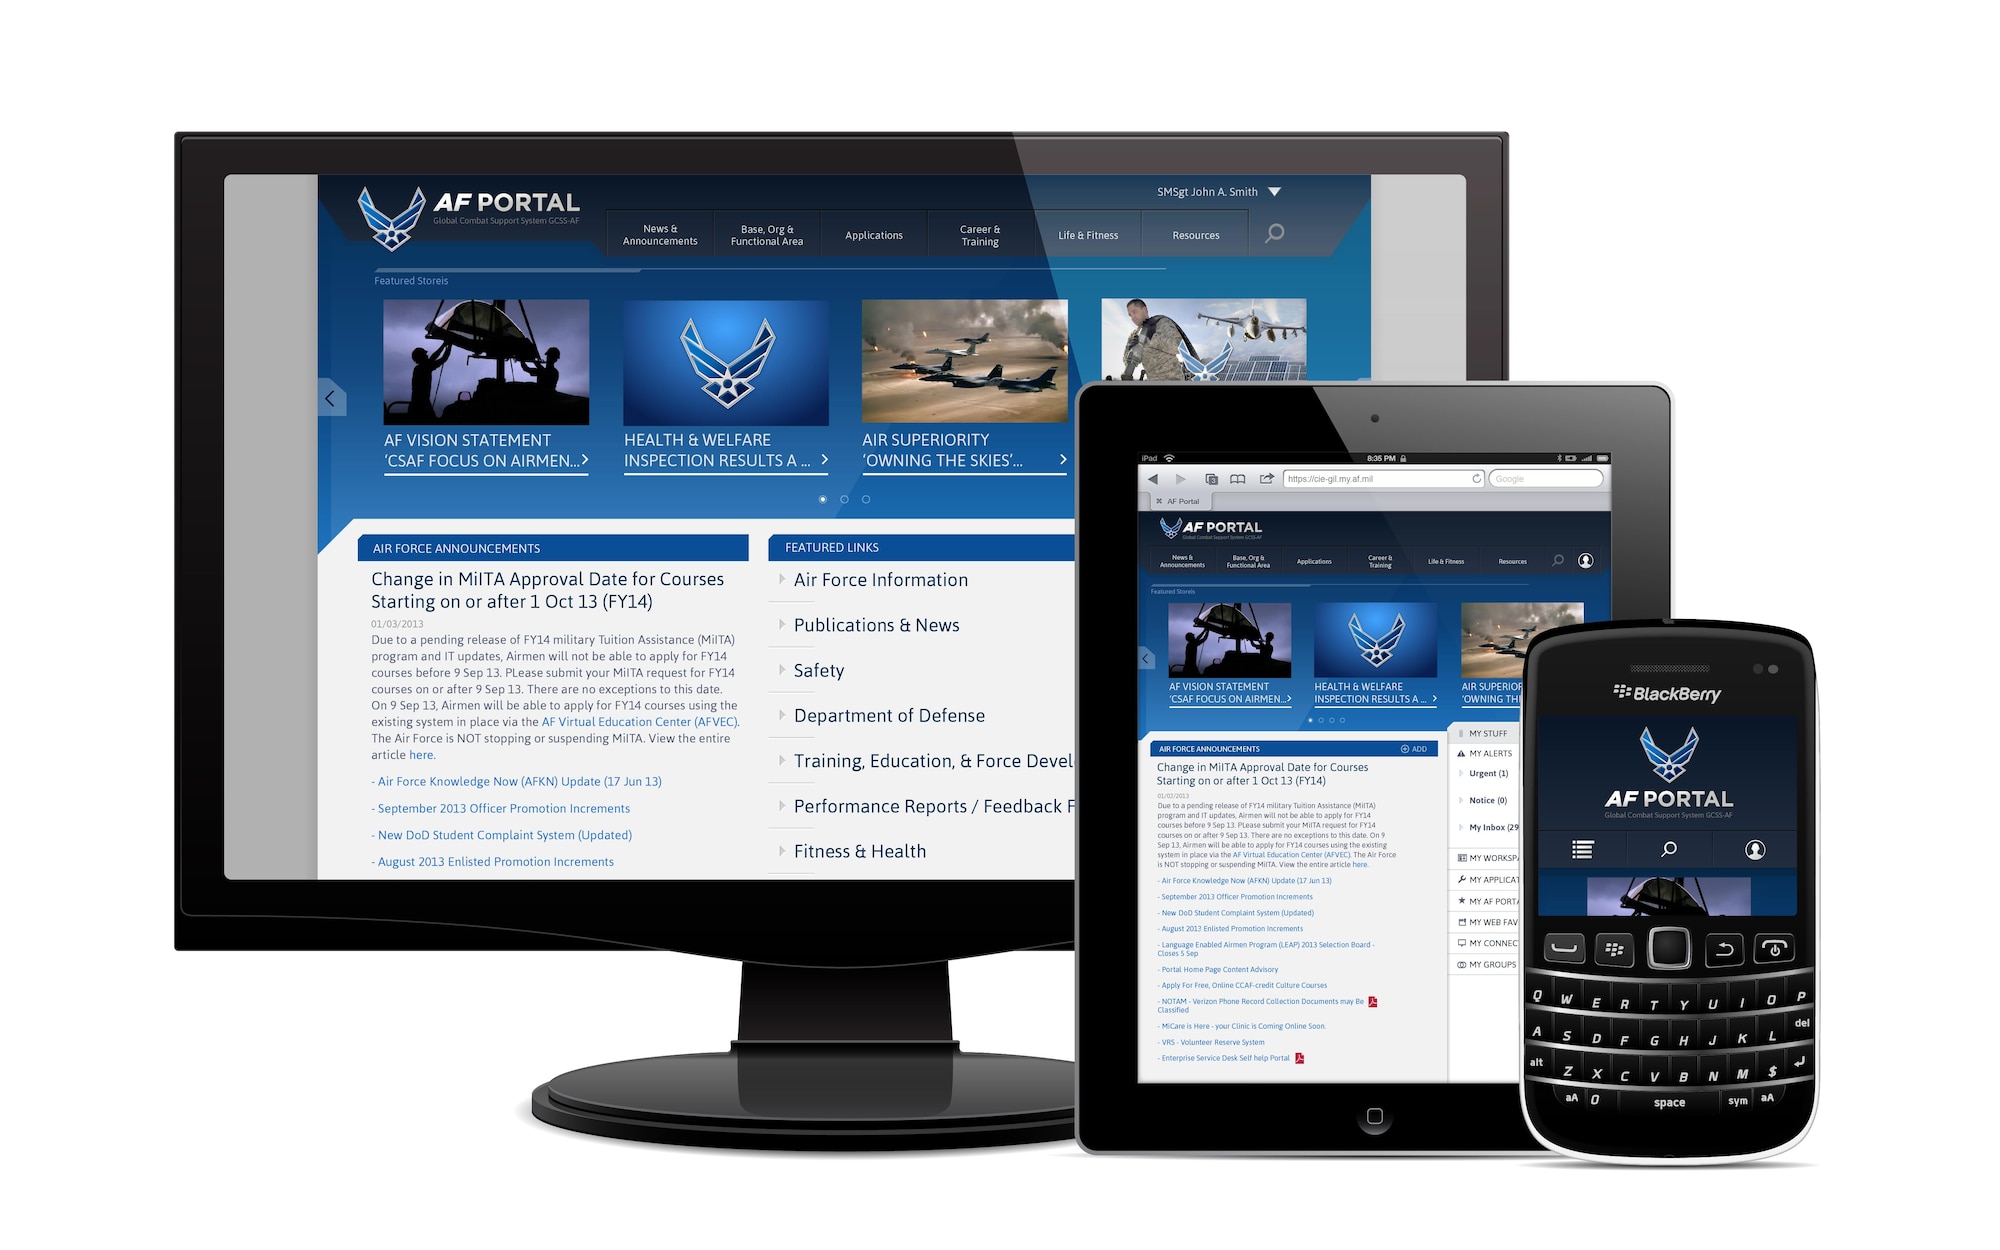 The Air Force Portal is undergoing a redesign that allows access on mobile devices, geared for easier navigation and operates in low bandwidth environments. The Global  Combat Support System, a Air Force Life Cycle Management Center-owned program, is responsible for the portal update, allowing more than 750,000 active users to stay connected. 